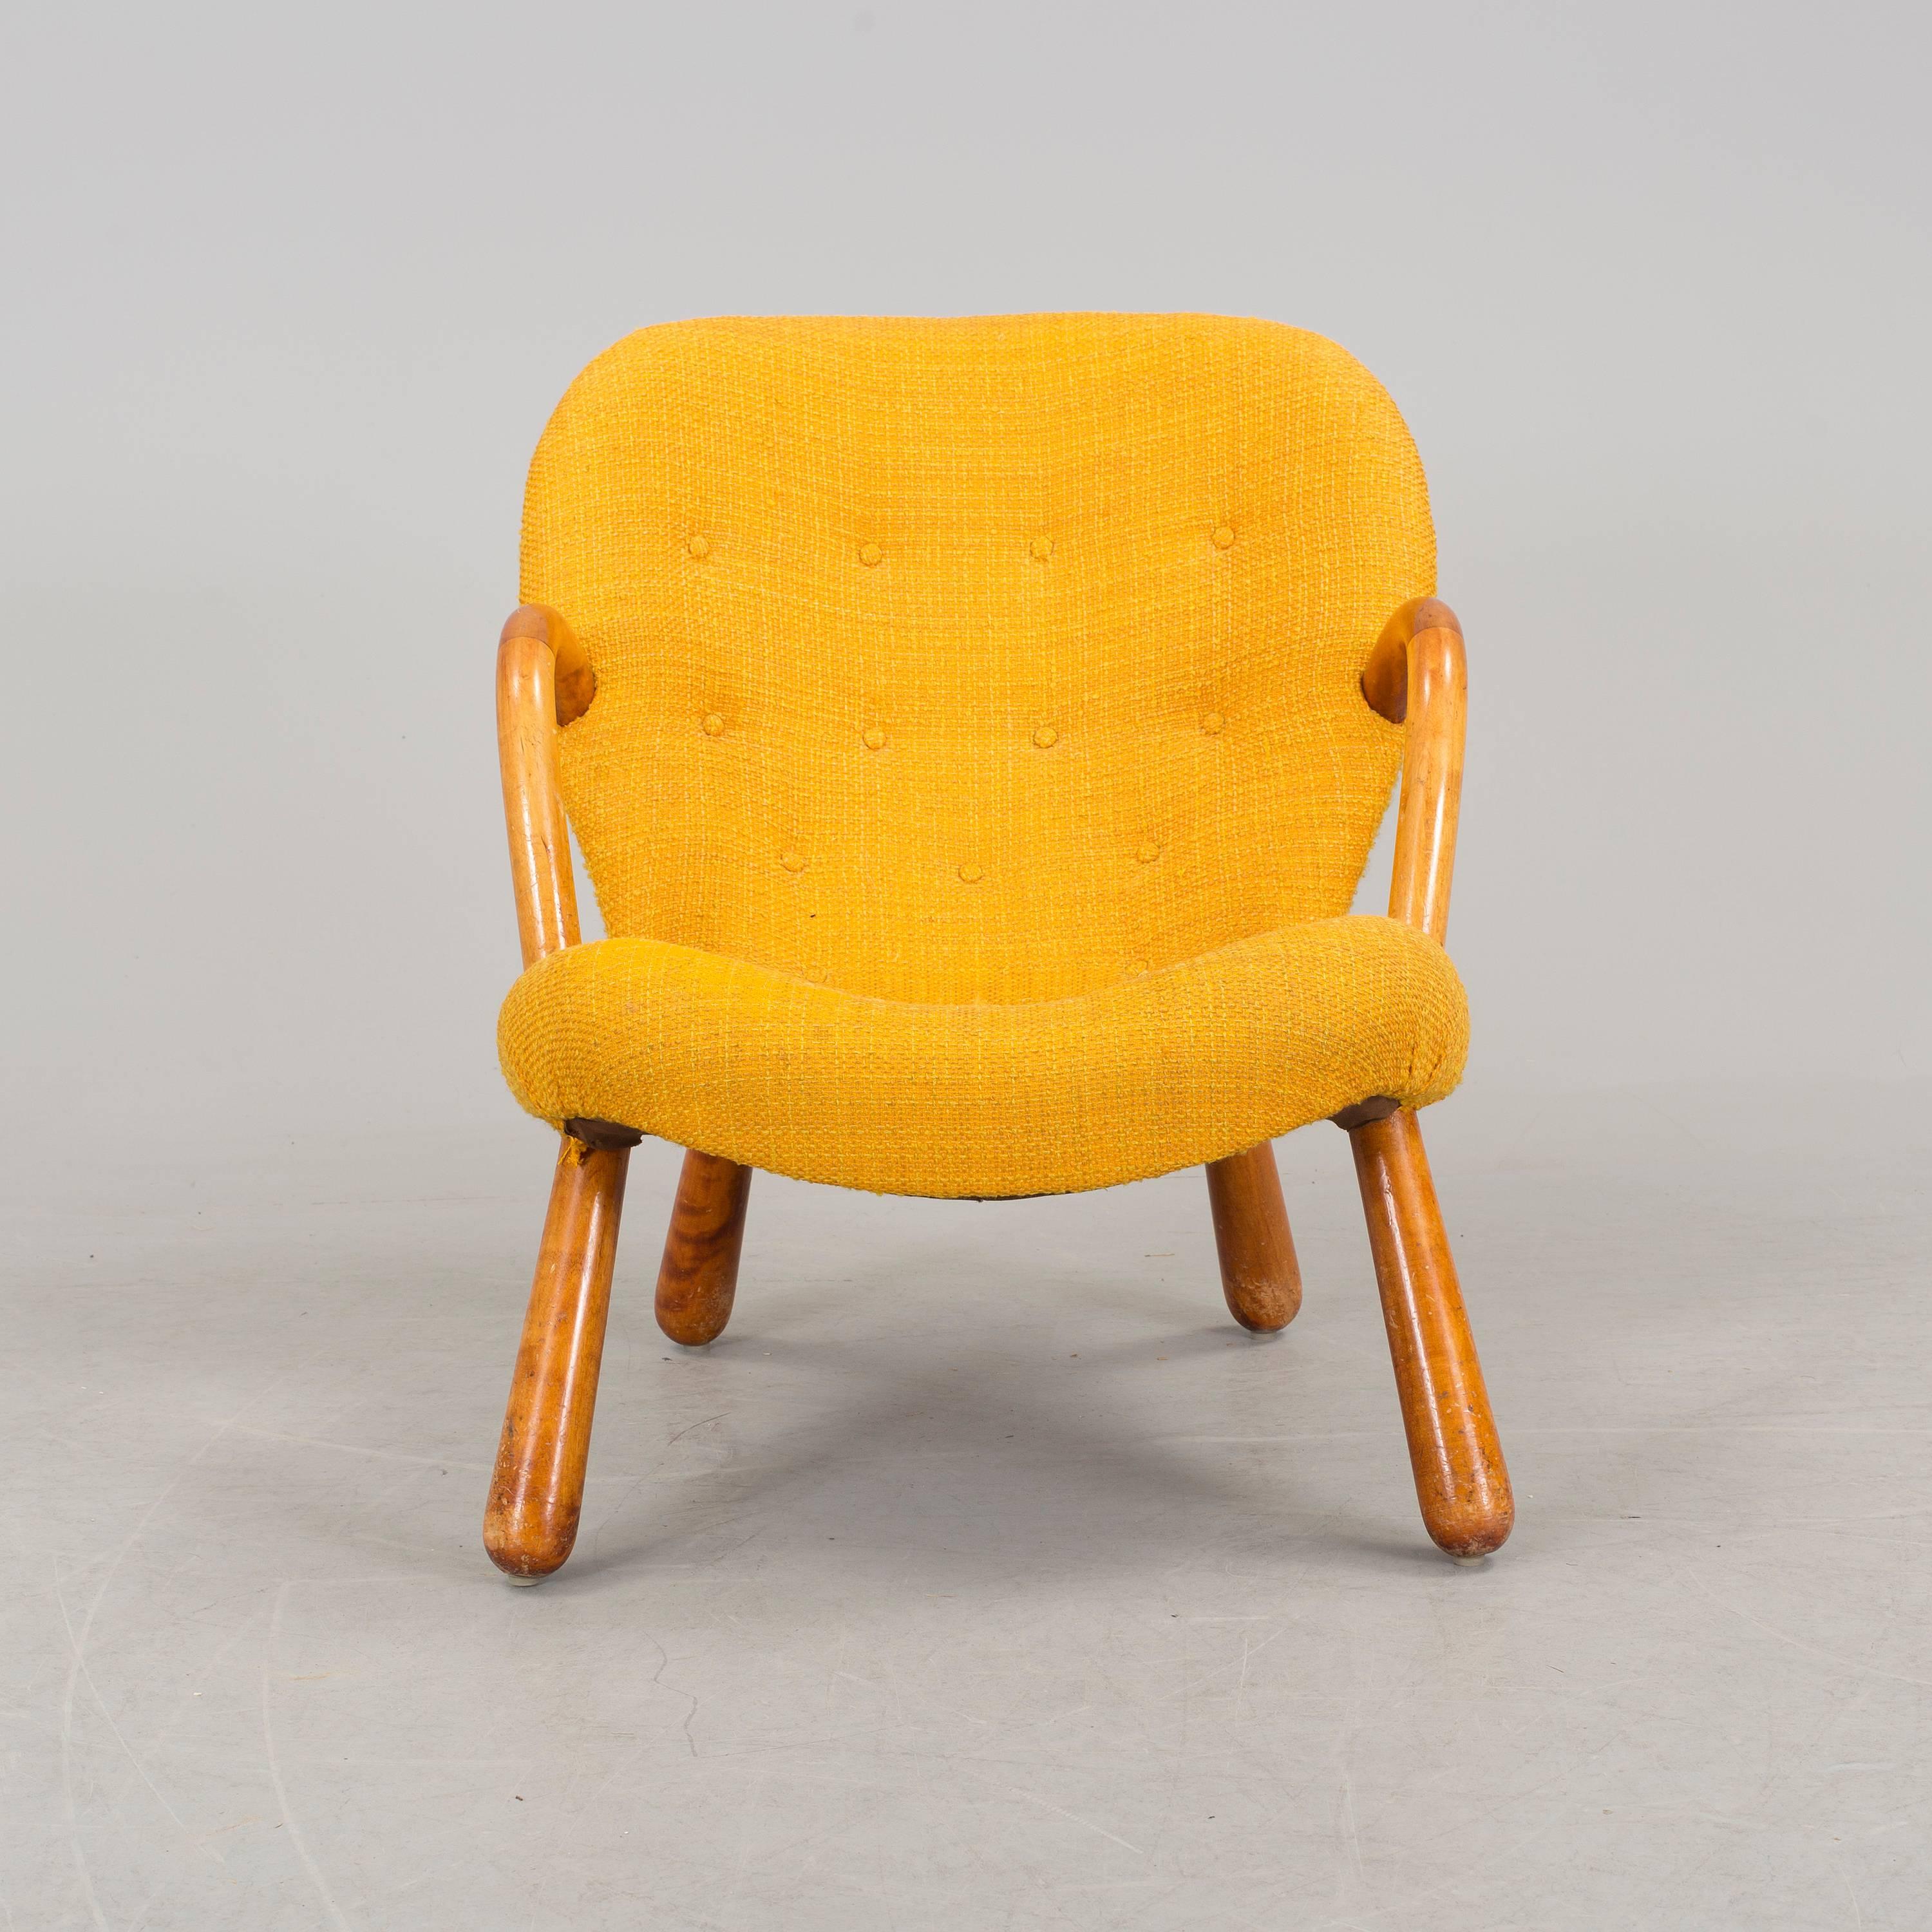 Clam chair with birch legs and yellow upholstery.